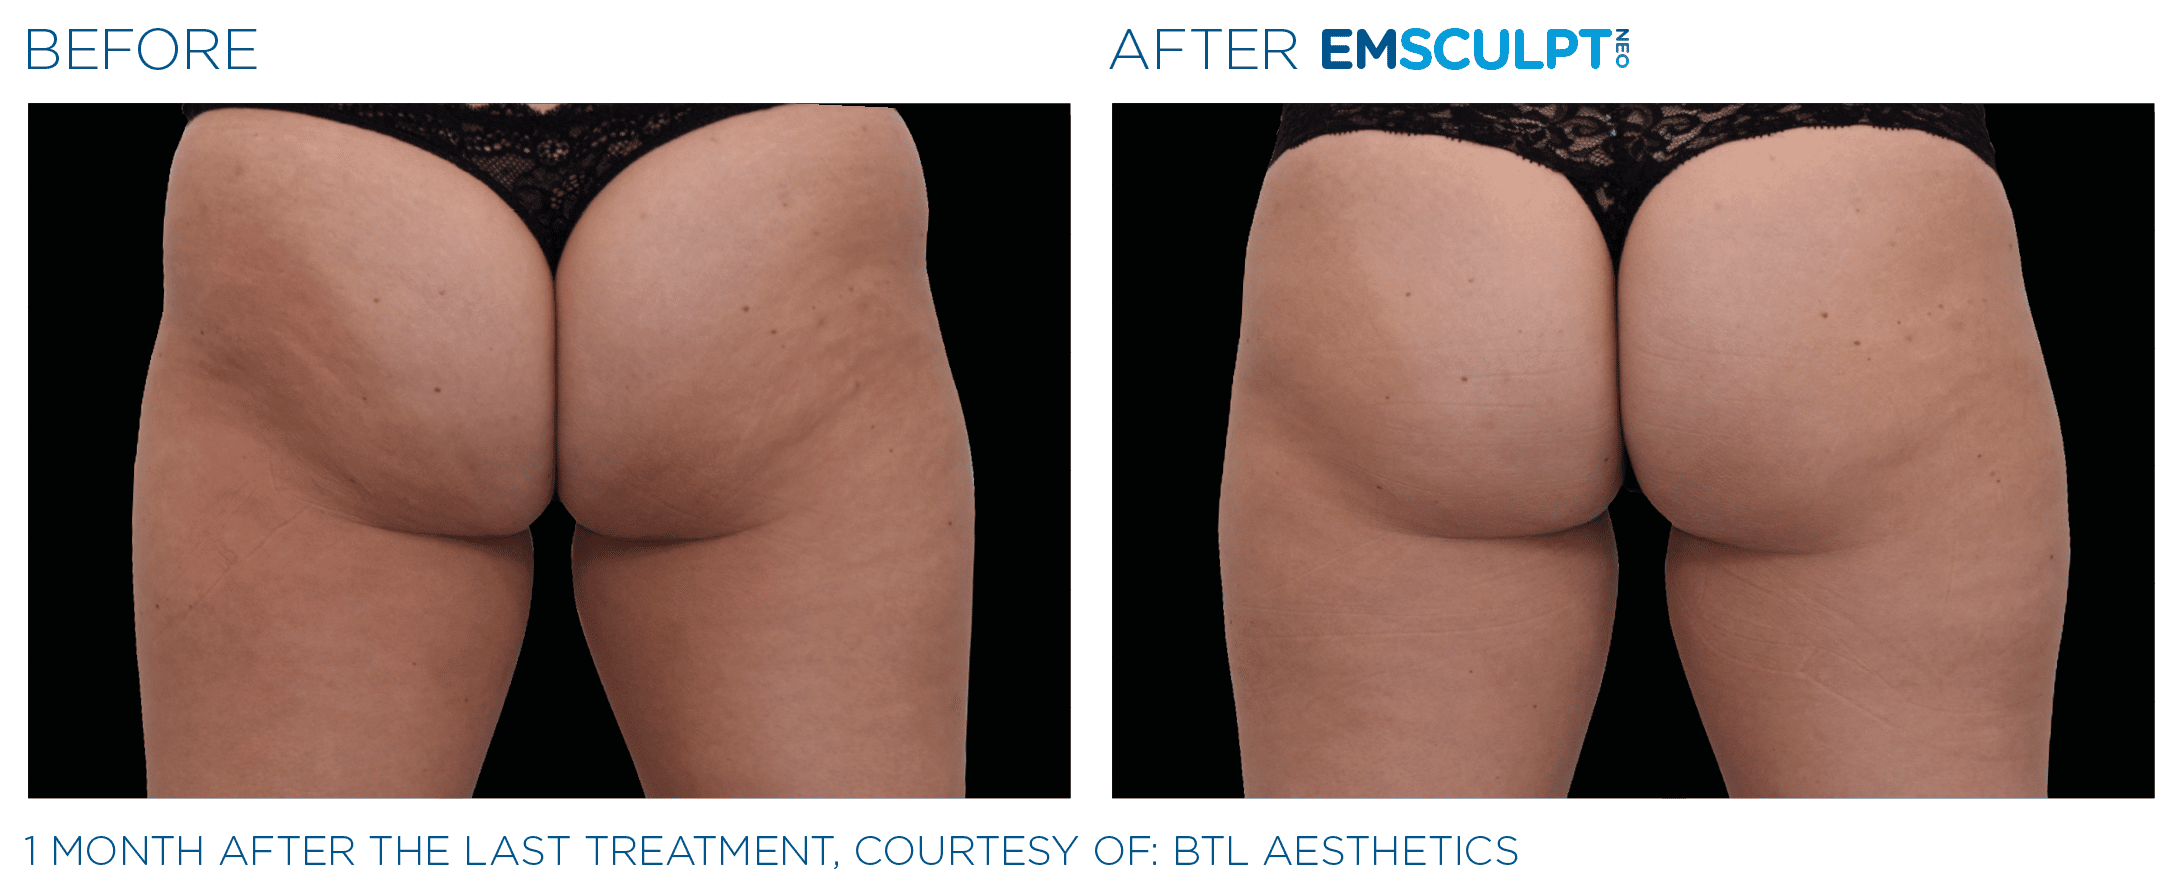 Emsculpt NEO Before and After Female Buttocks